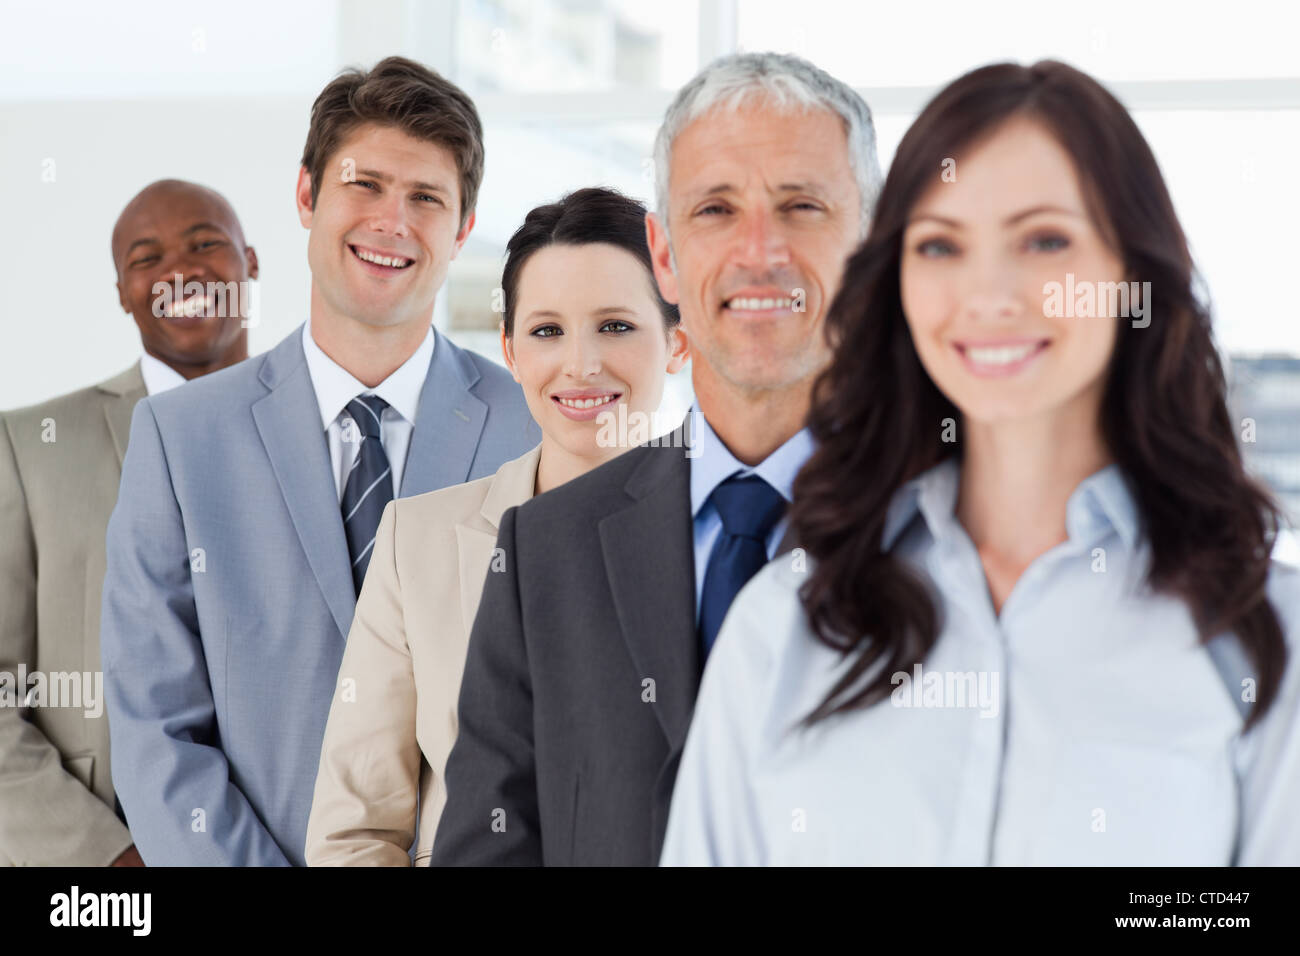 Young smiling executive standing in a well-lit room among his co-workers Stock Photo